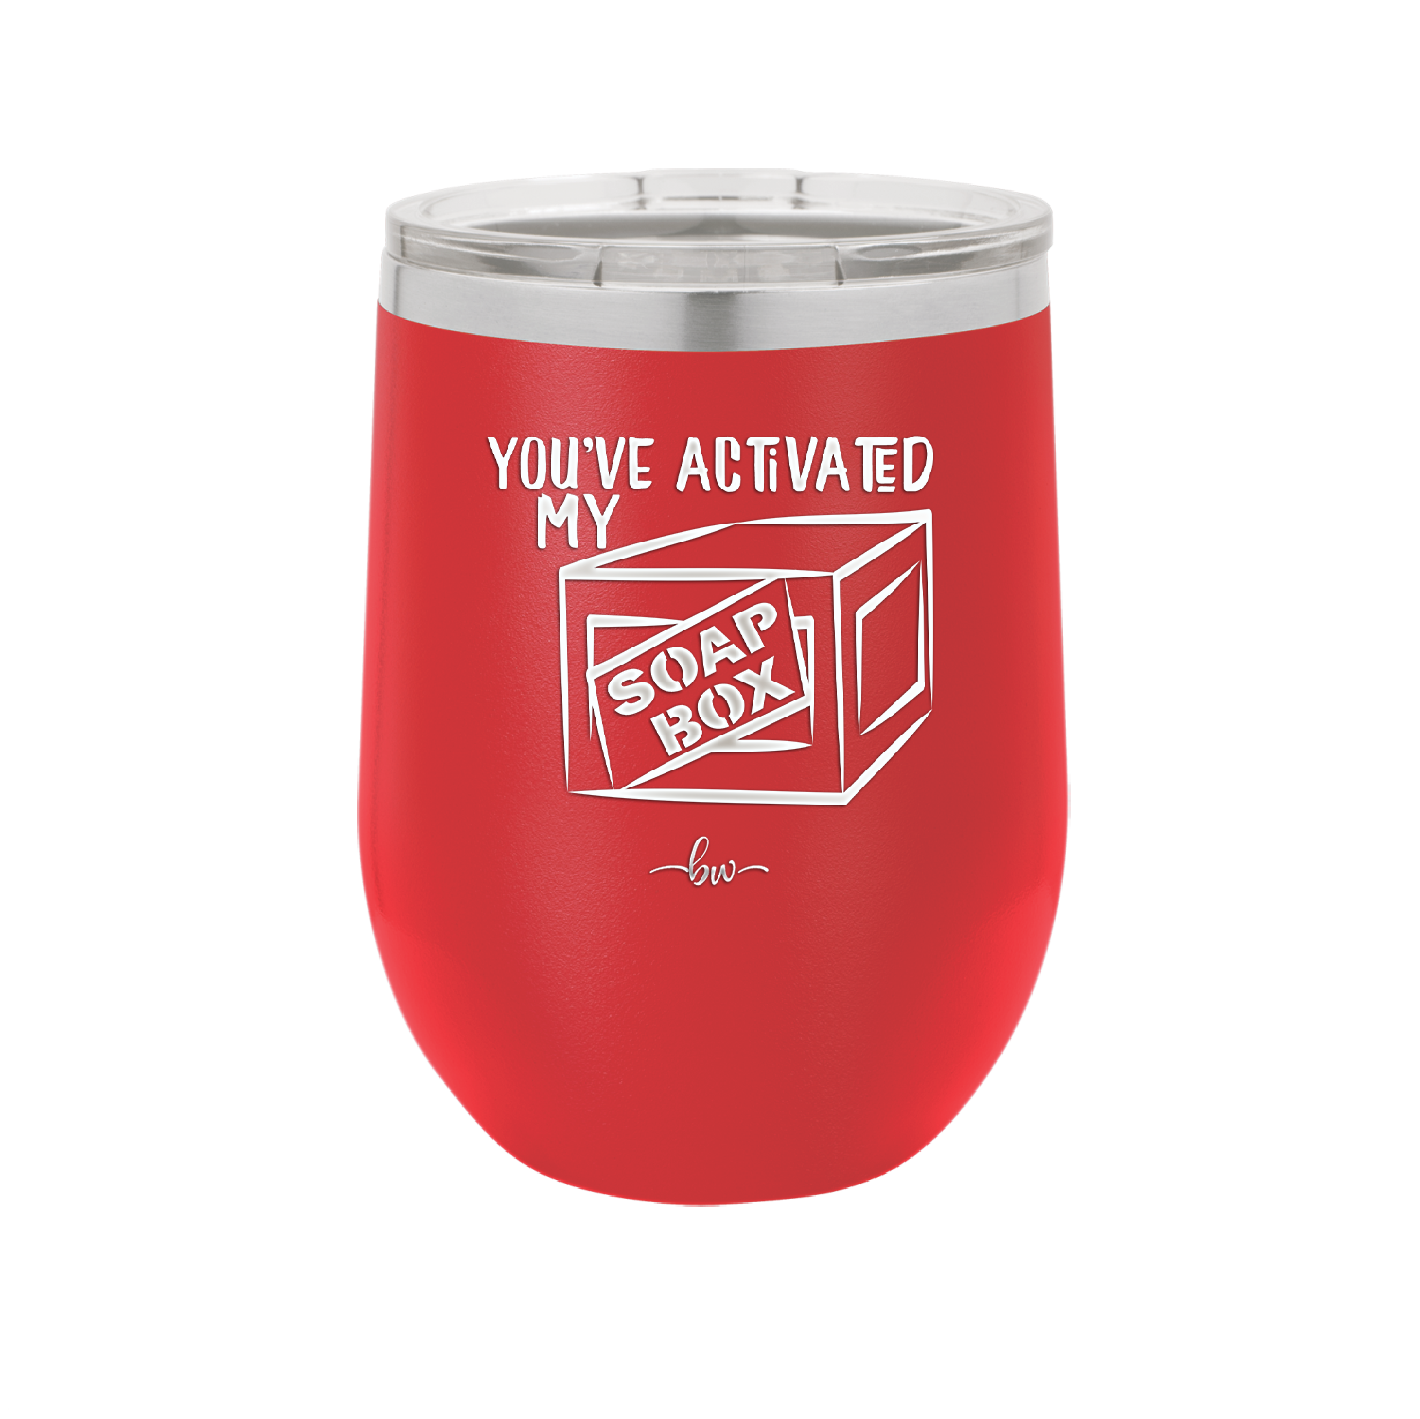 You've Activated My Soap Box - Laser Engraved Stainless Steel Drinkware - 1838 -